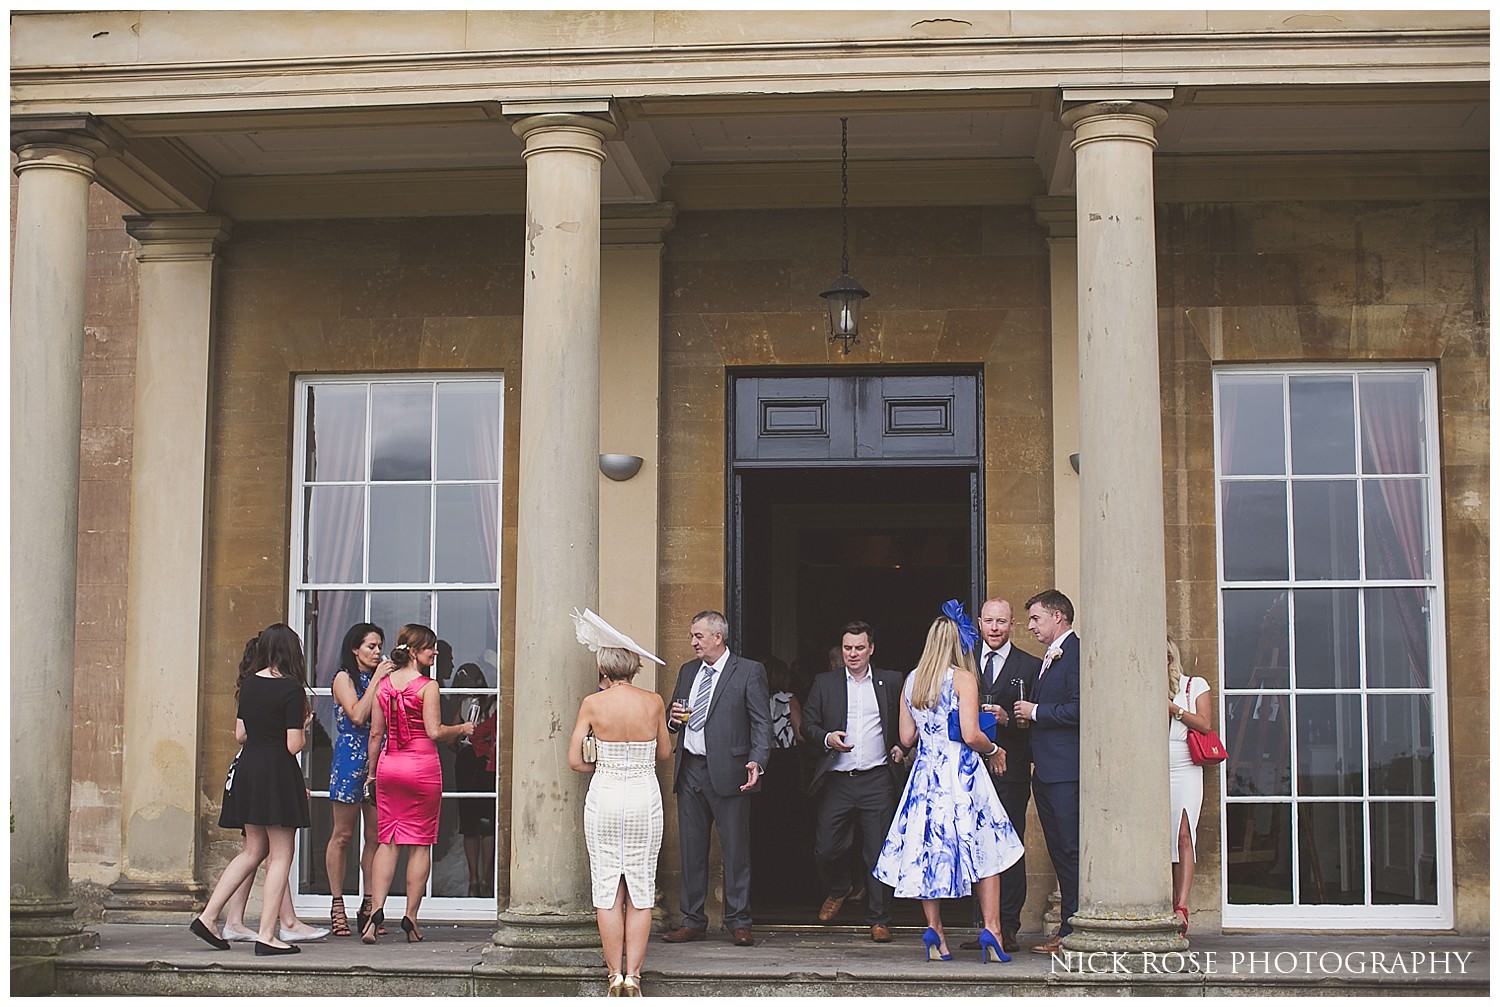  Guests standing outside under the columns for a Rudding Park wedding in Harrogate 